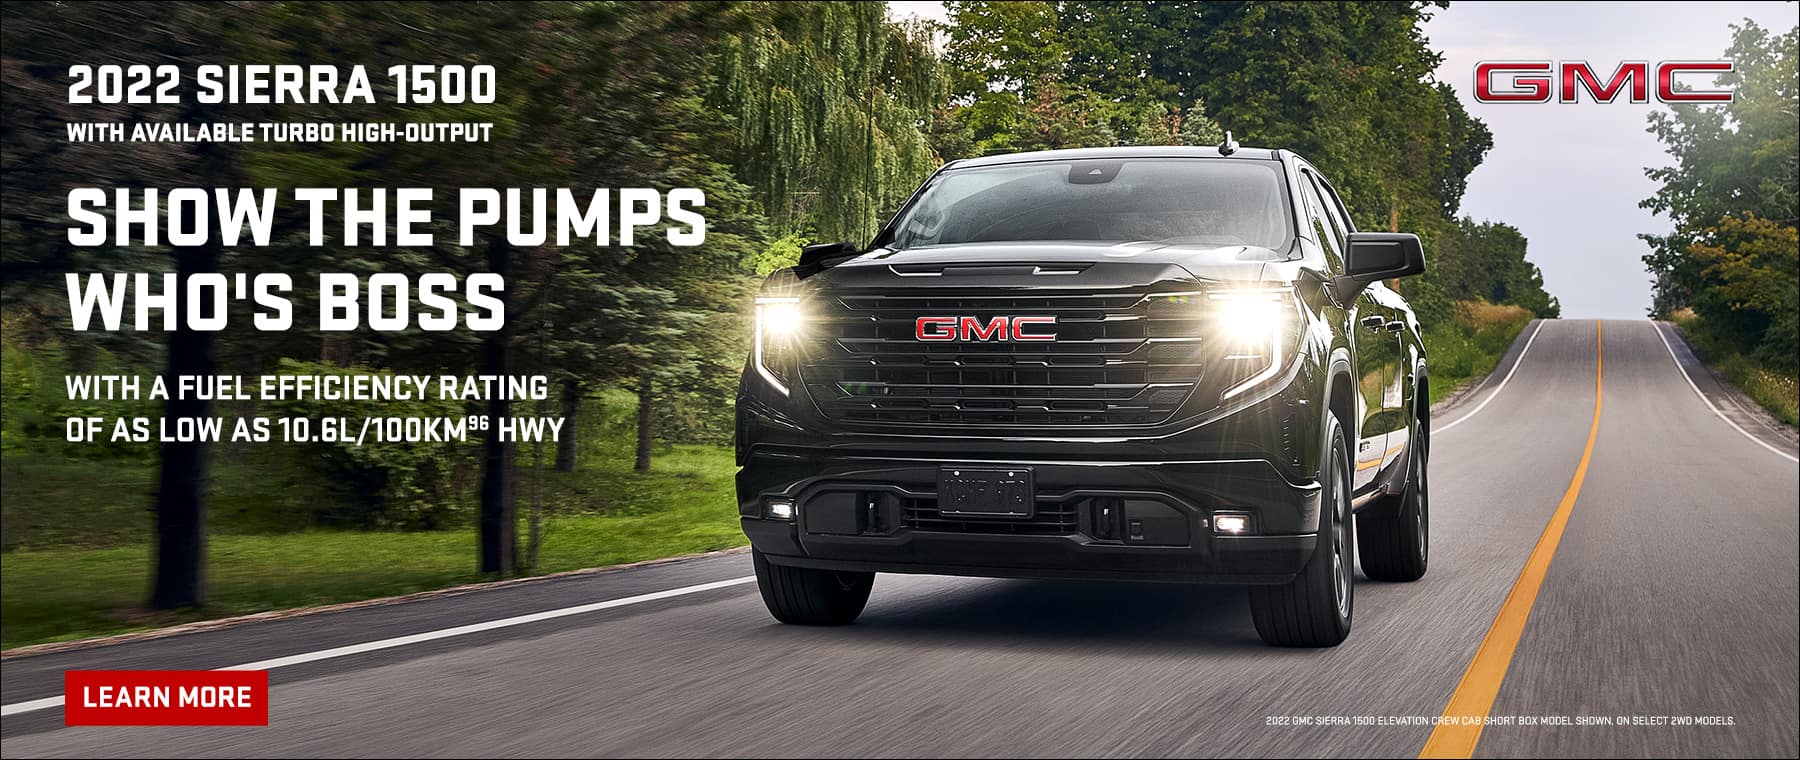 Get 2.99% financing for up to 72 months on a new 2022 GMC Sierra 1500